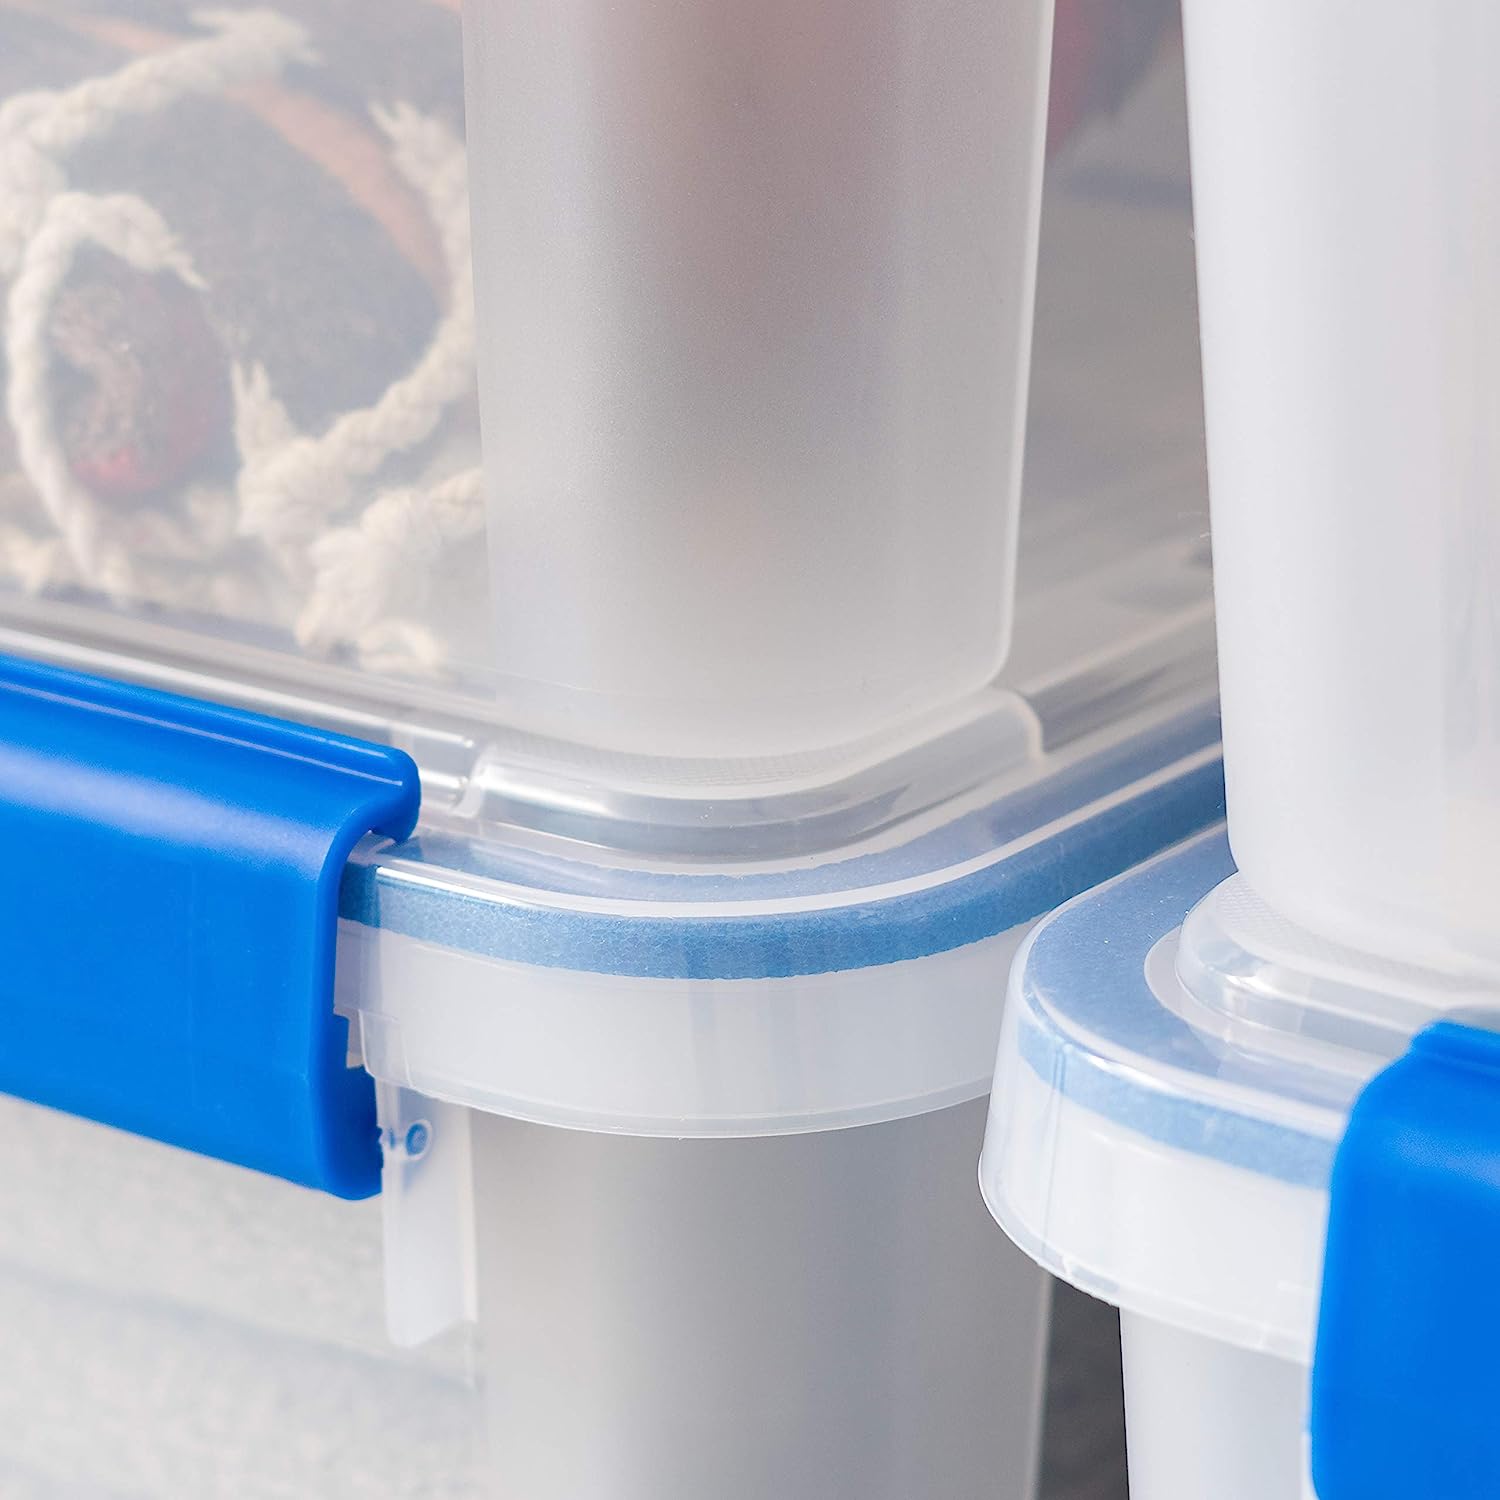 https://bigbigmart.com/wp-content/uploads/2023/06/IRIS-USA-16-Quart-WEATHERPRO-Plastic-Storage-Box-with-Durable-Lid-and-Seal-and-Secure-Latching-Buckles-Clear-With-Blue-Buckles-Weathertight-3-Pack4.jpg